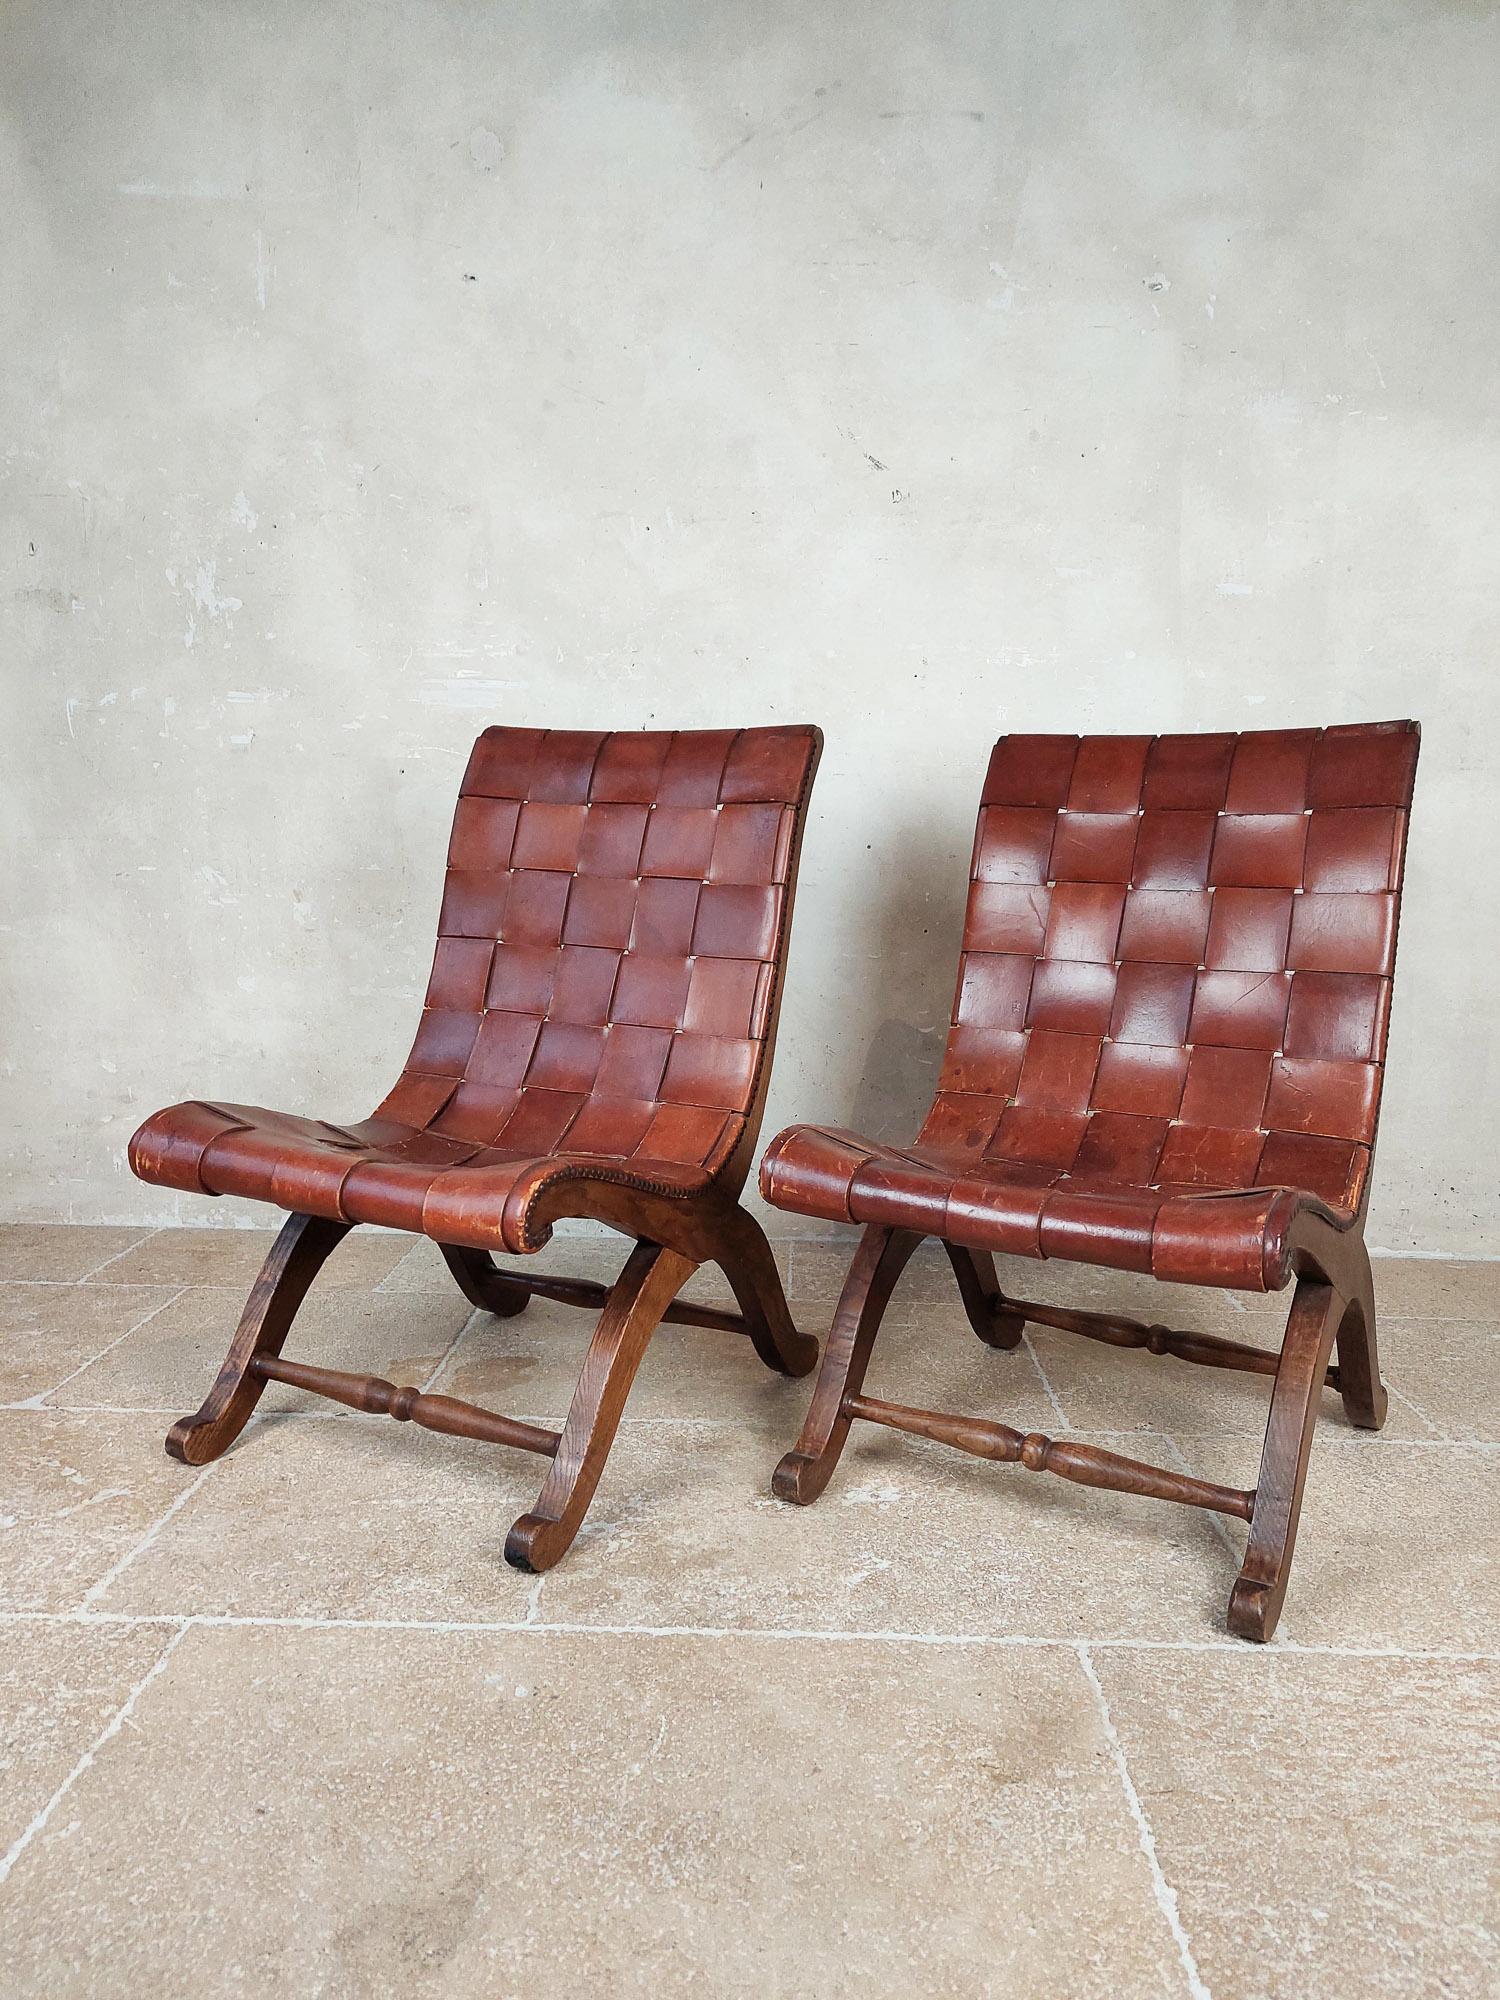 Mid-20th Century Pair of Spanish Leather 'Slipper Chairs' by Pierre Lottier for Valenti